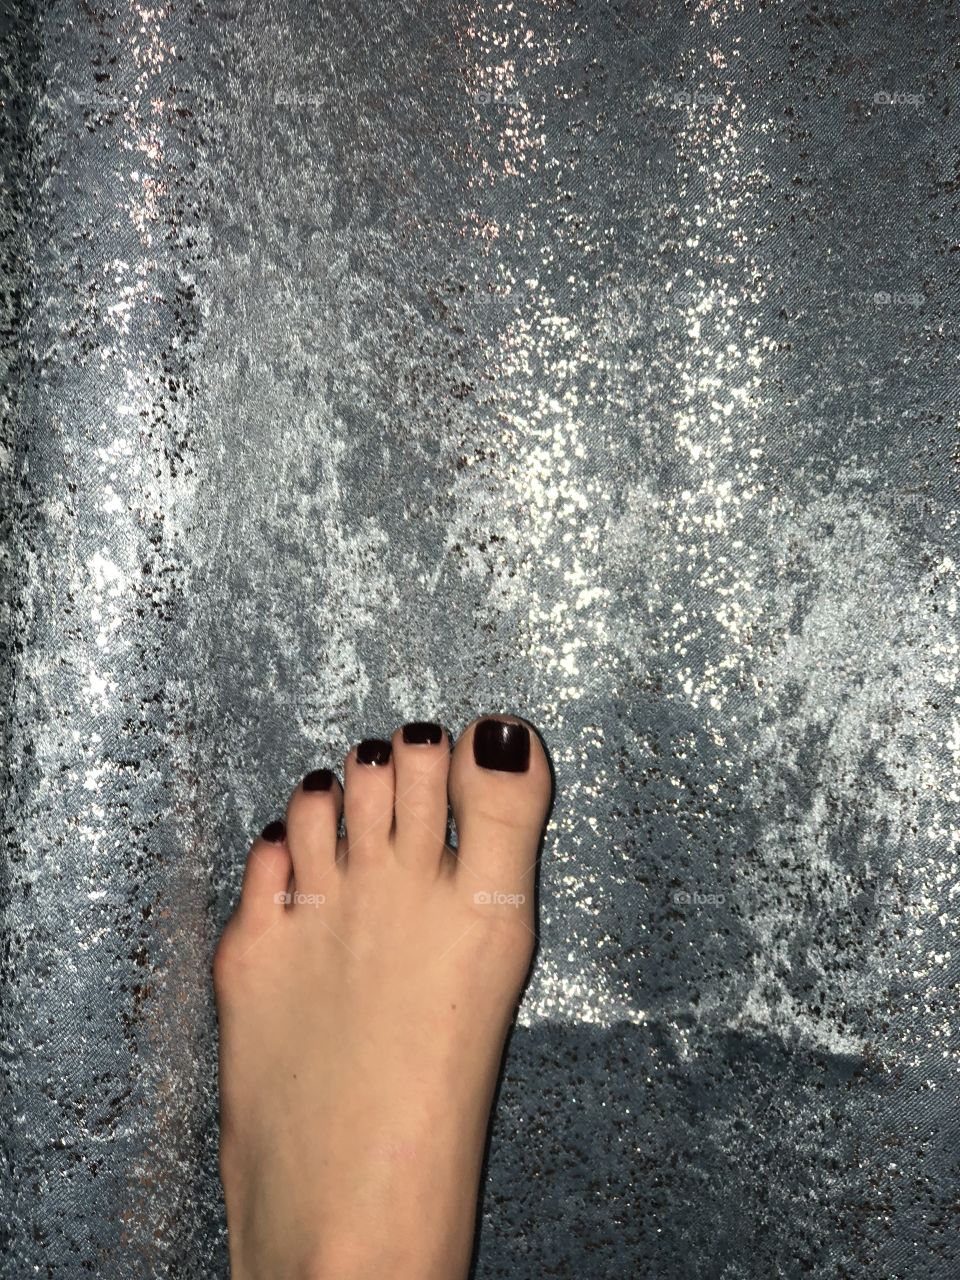 Sample picture of our feet pics